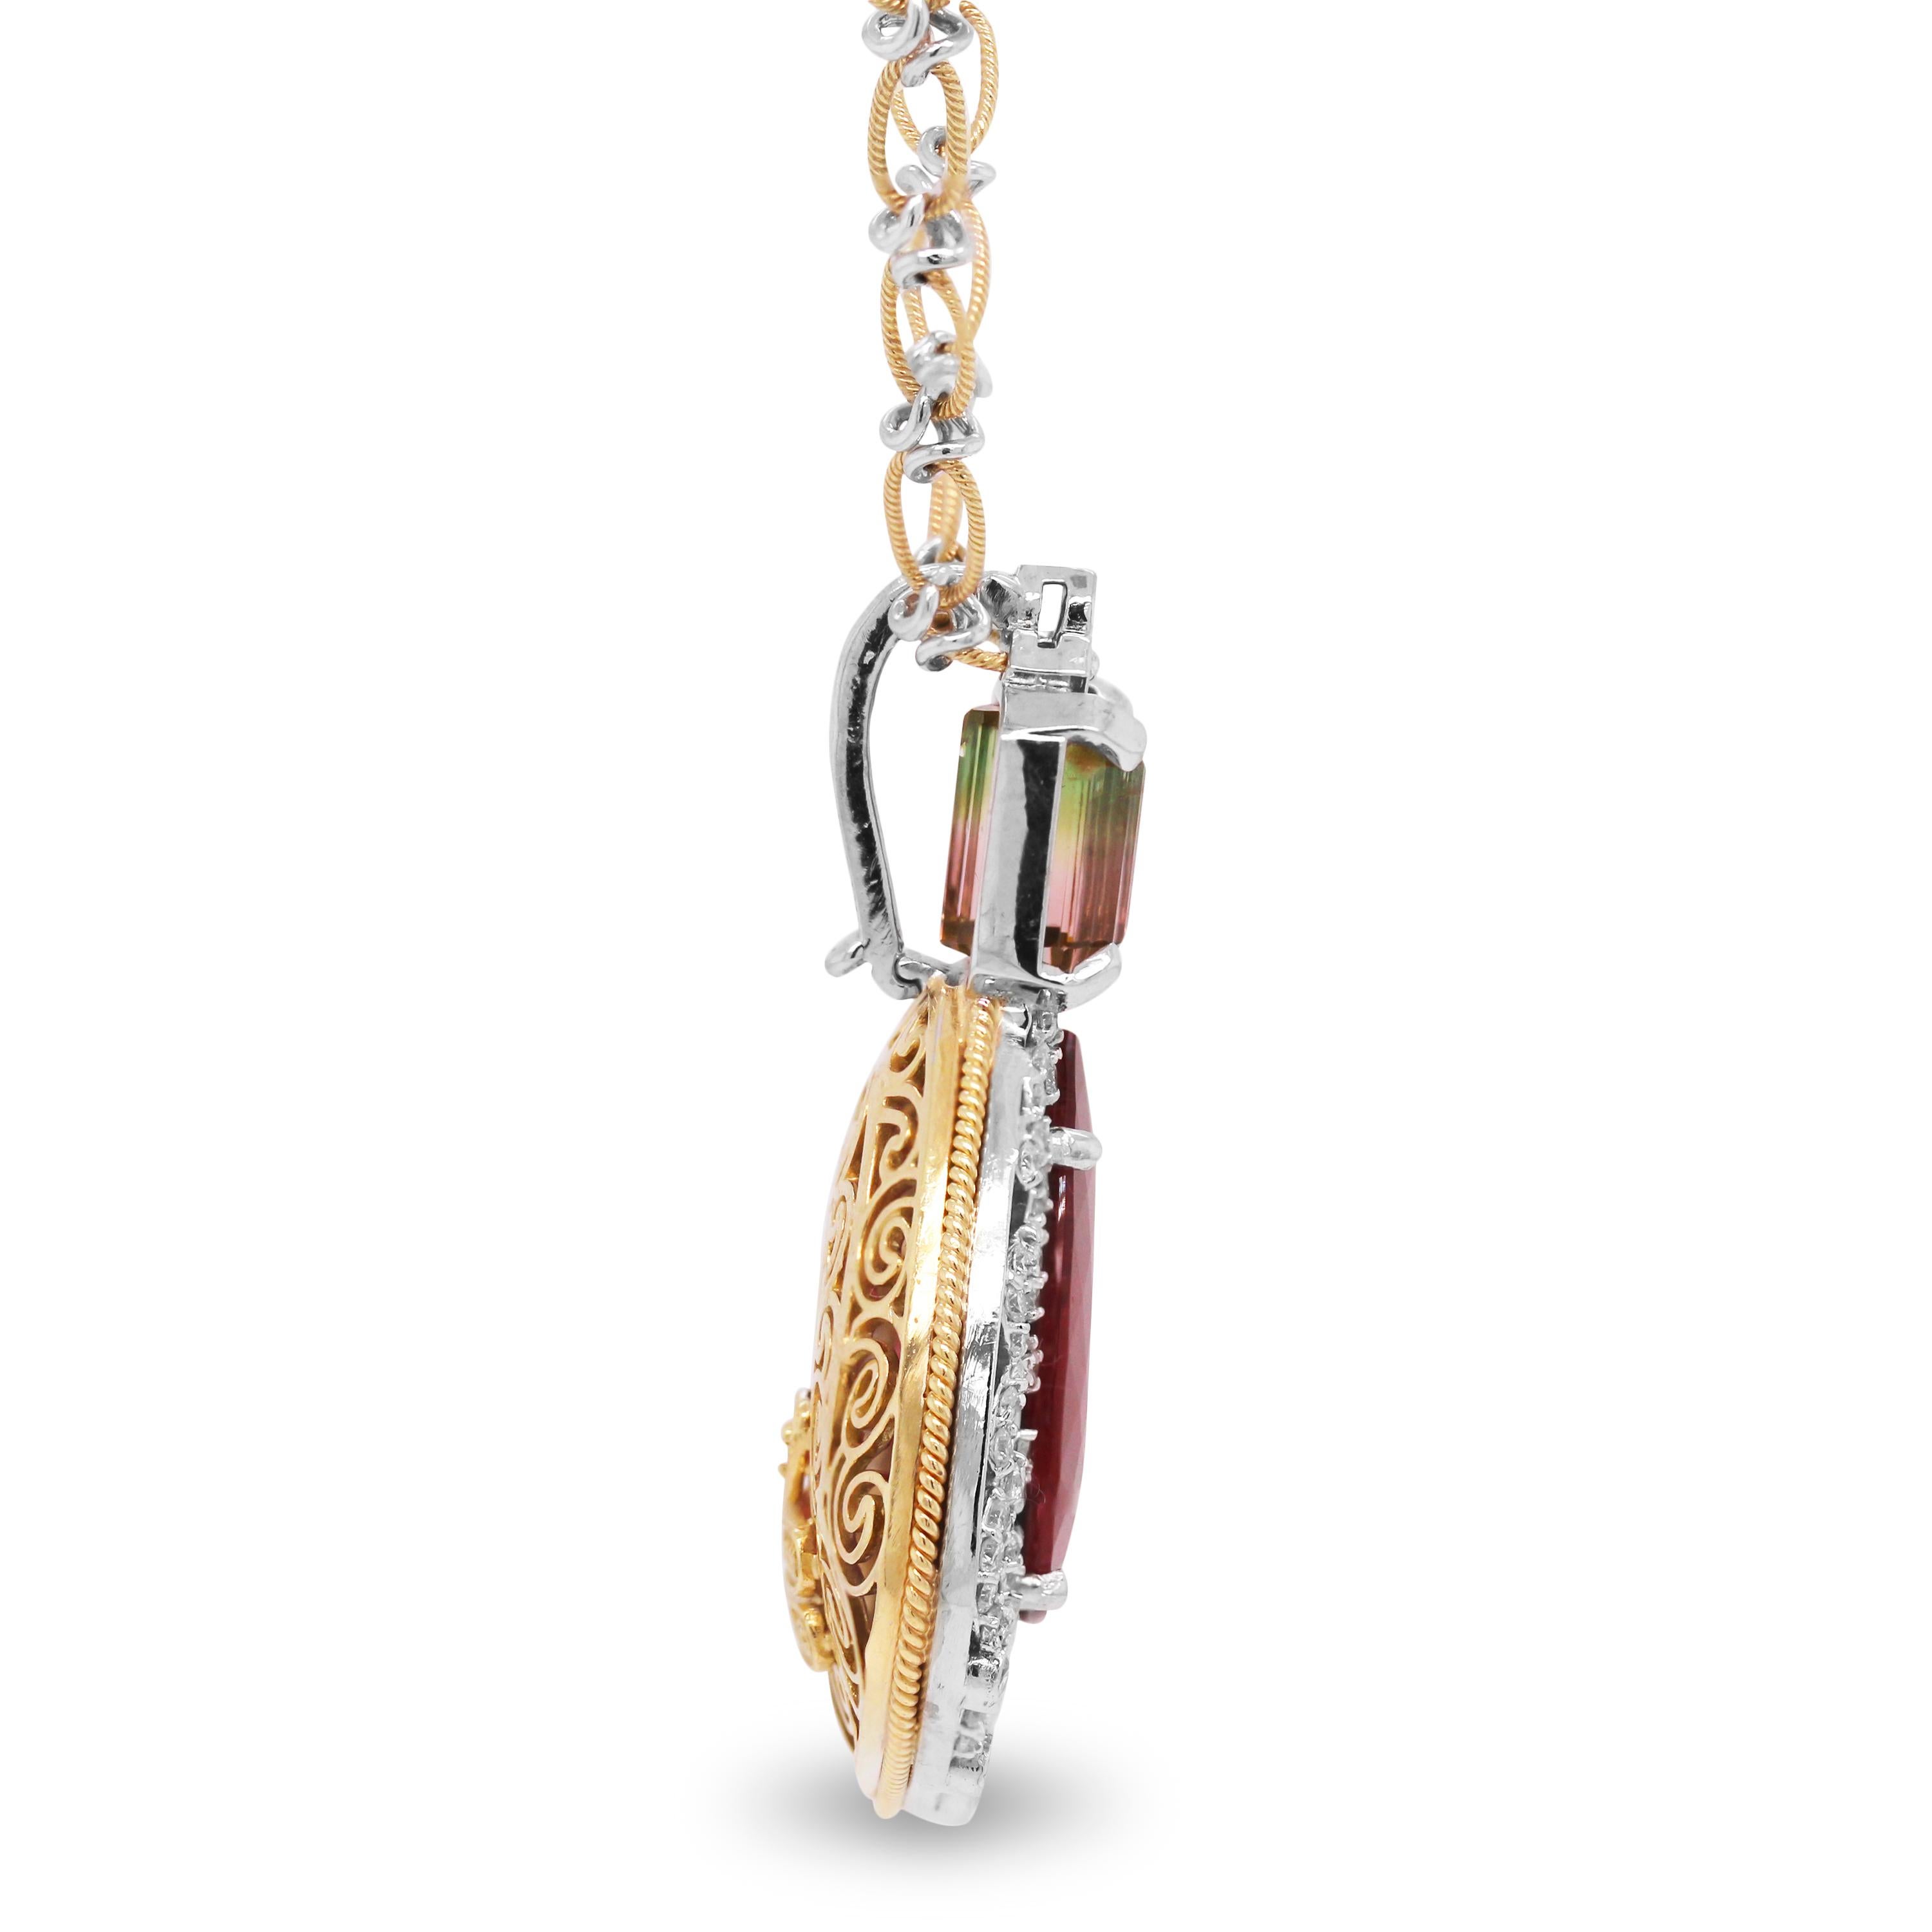 18K Yellow and White Two-Tone Gold and Diamond Pendant with Pearshape Rubelite and Bi-Color Tourmaline and Handmade Oval Link Chain by Stambolian

This one-of-one pendant was specially made to fit this Rubelite and Bi-Color Tourmaline together. The